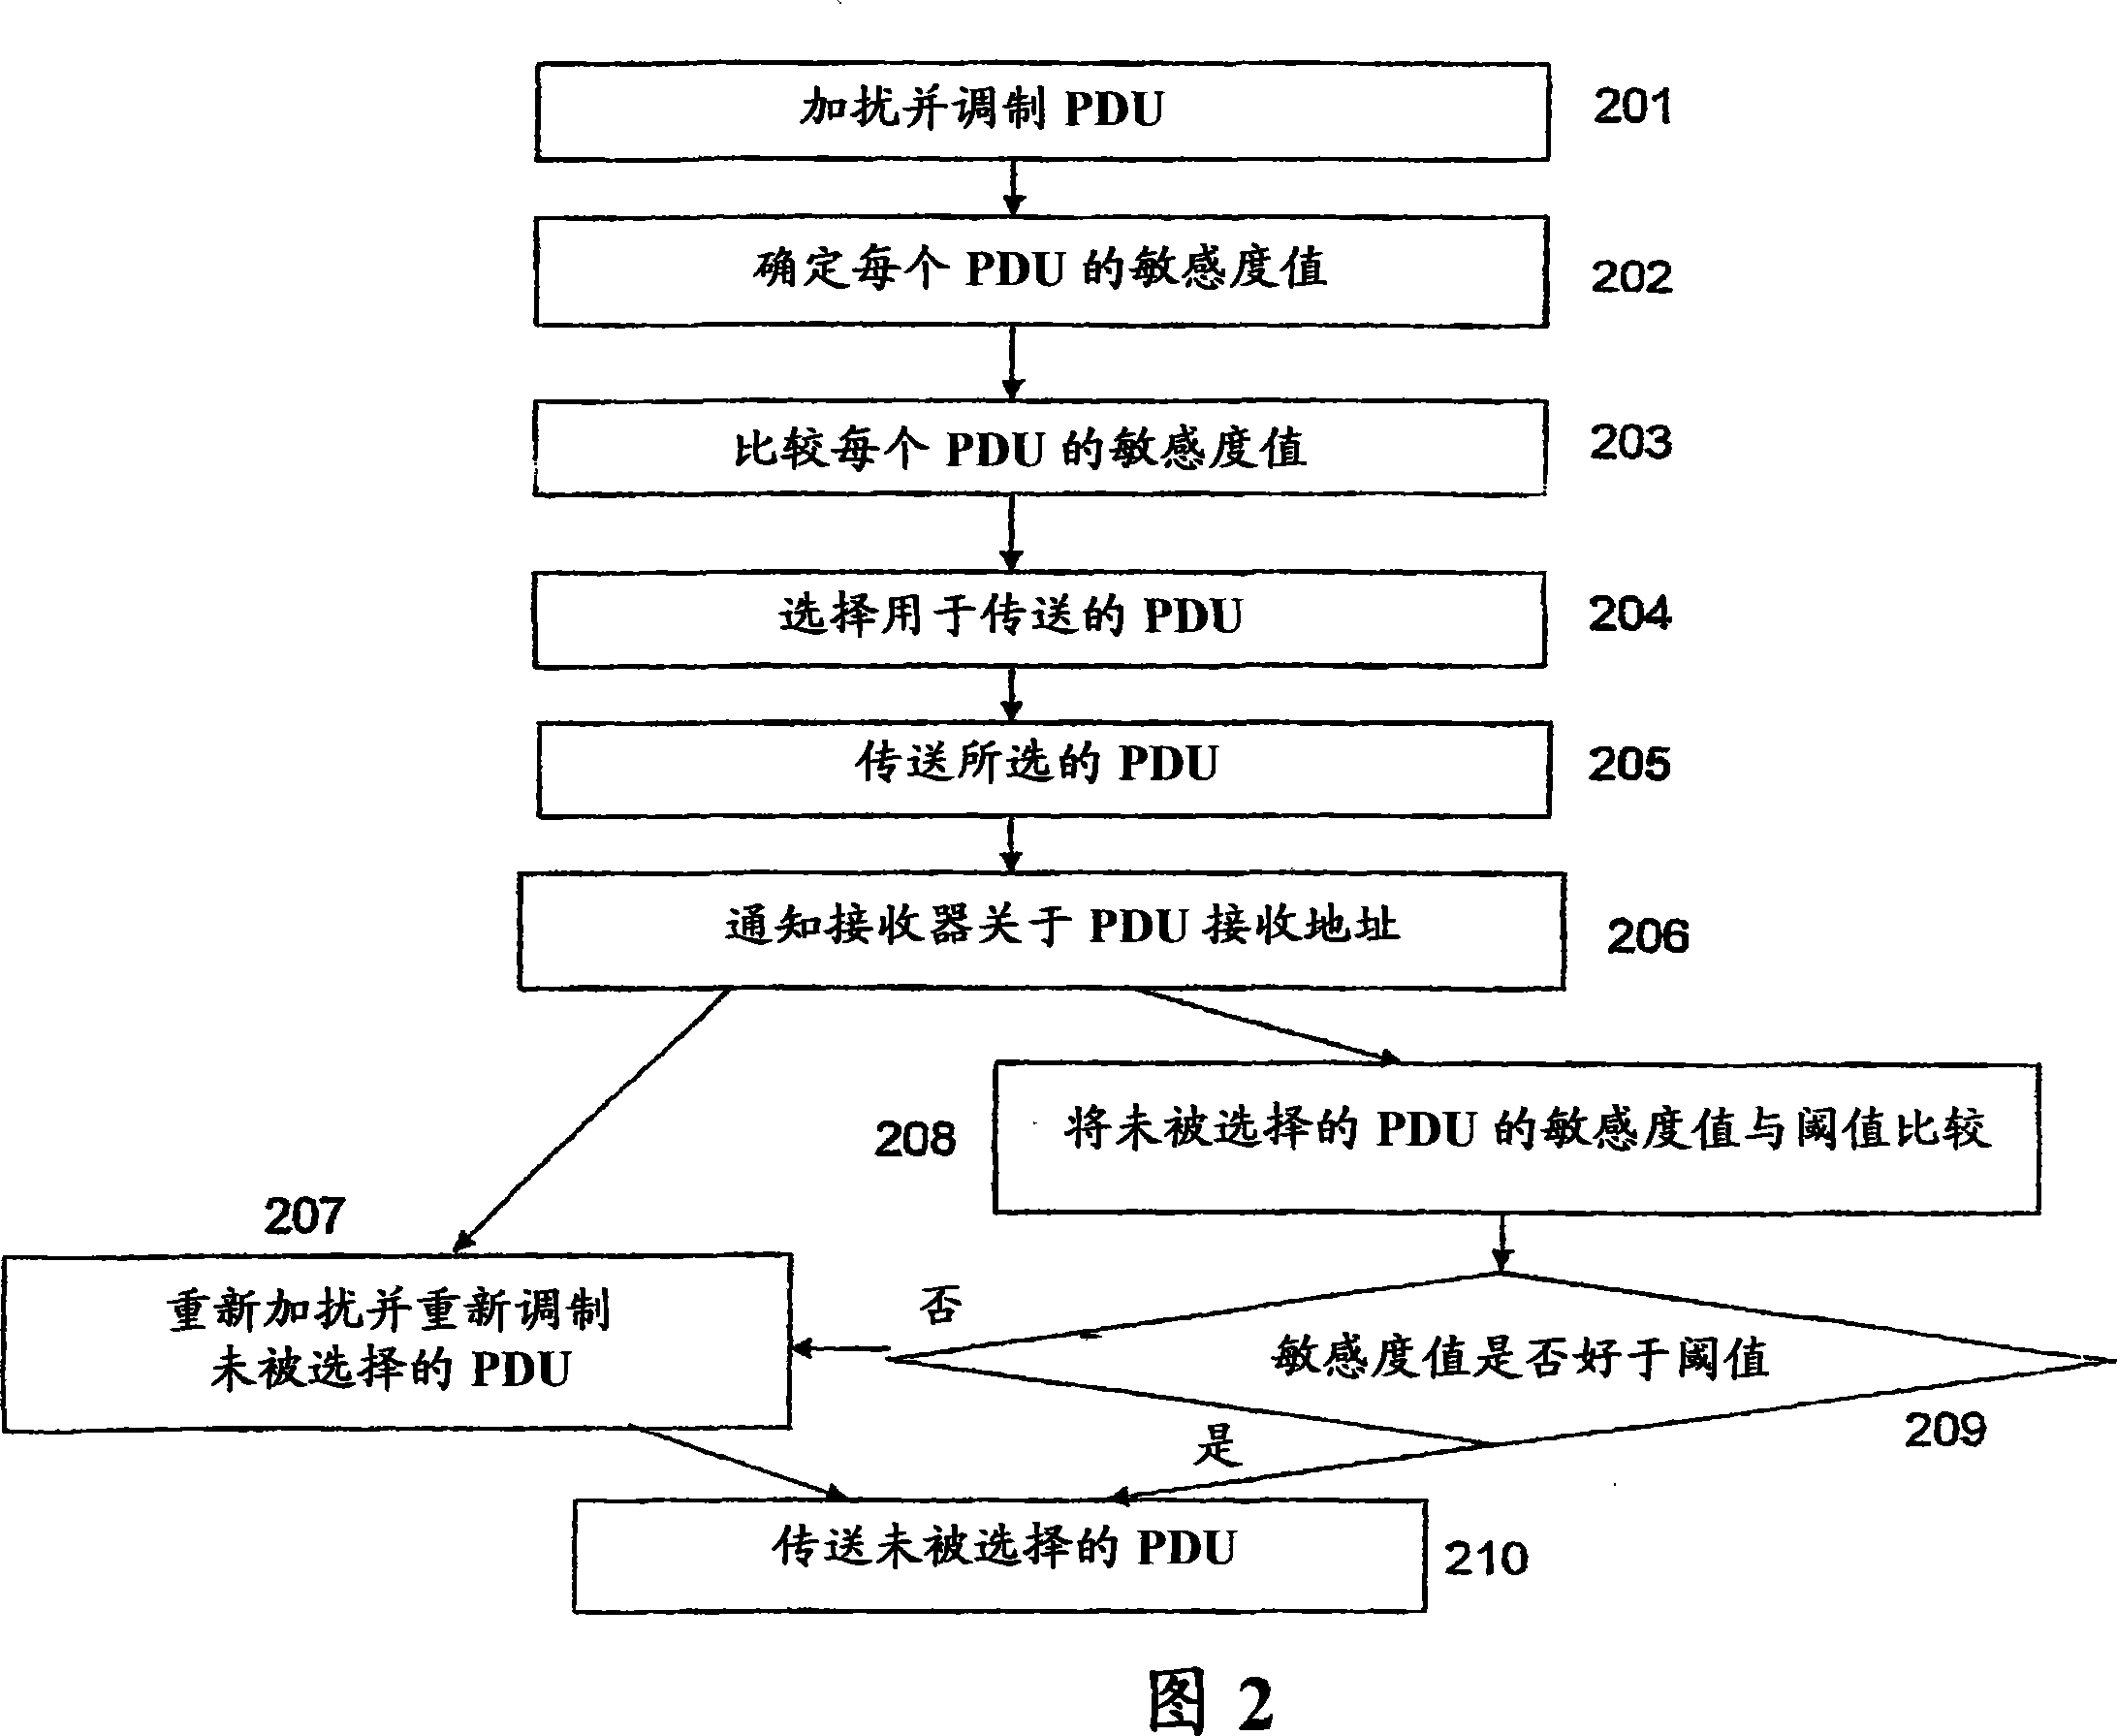 Transmitter device and method for transmitting packet data units in communication system